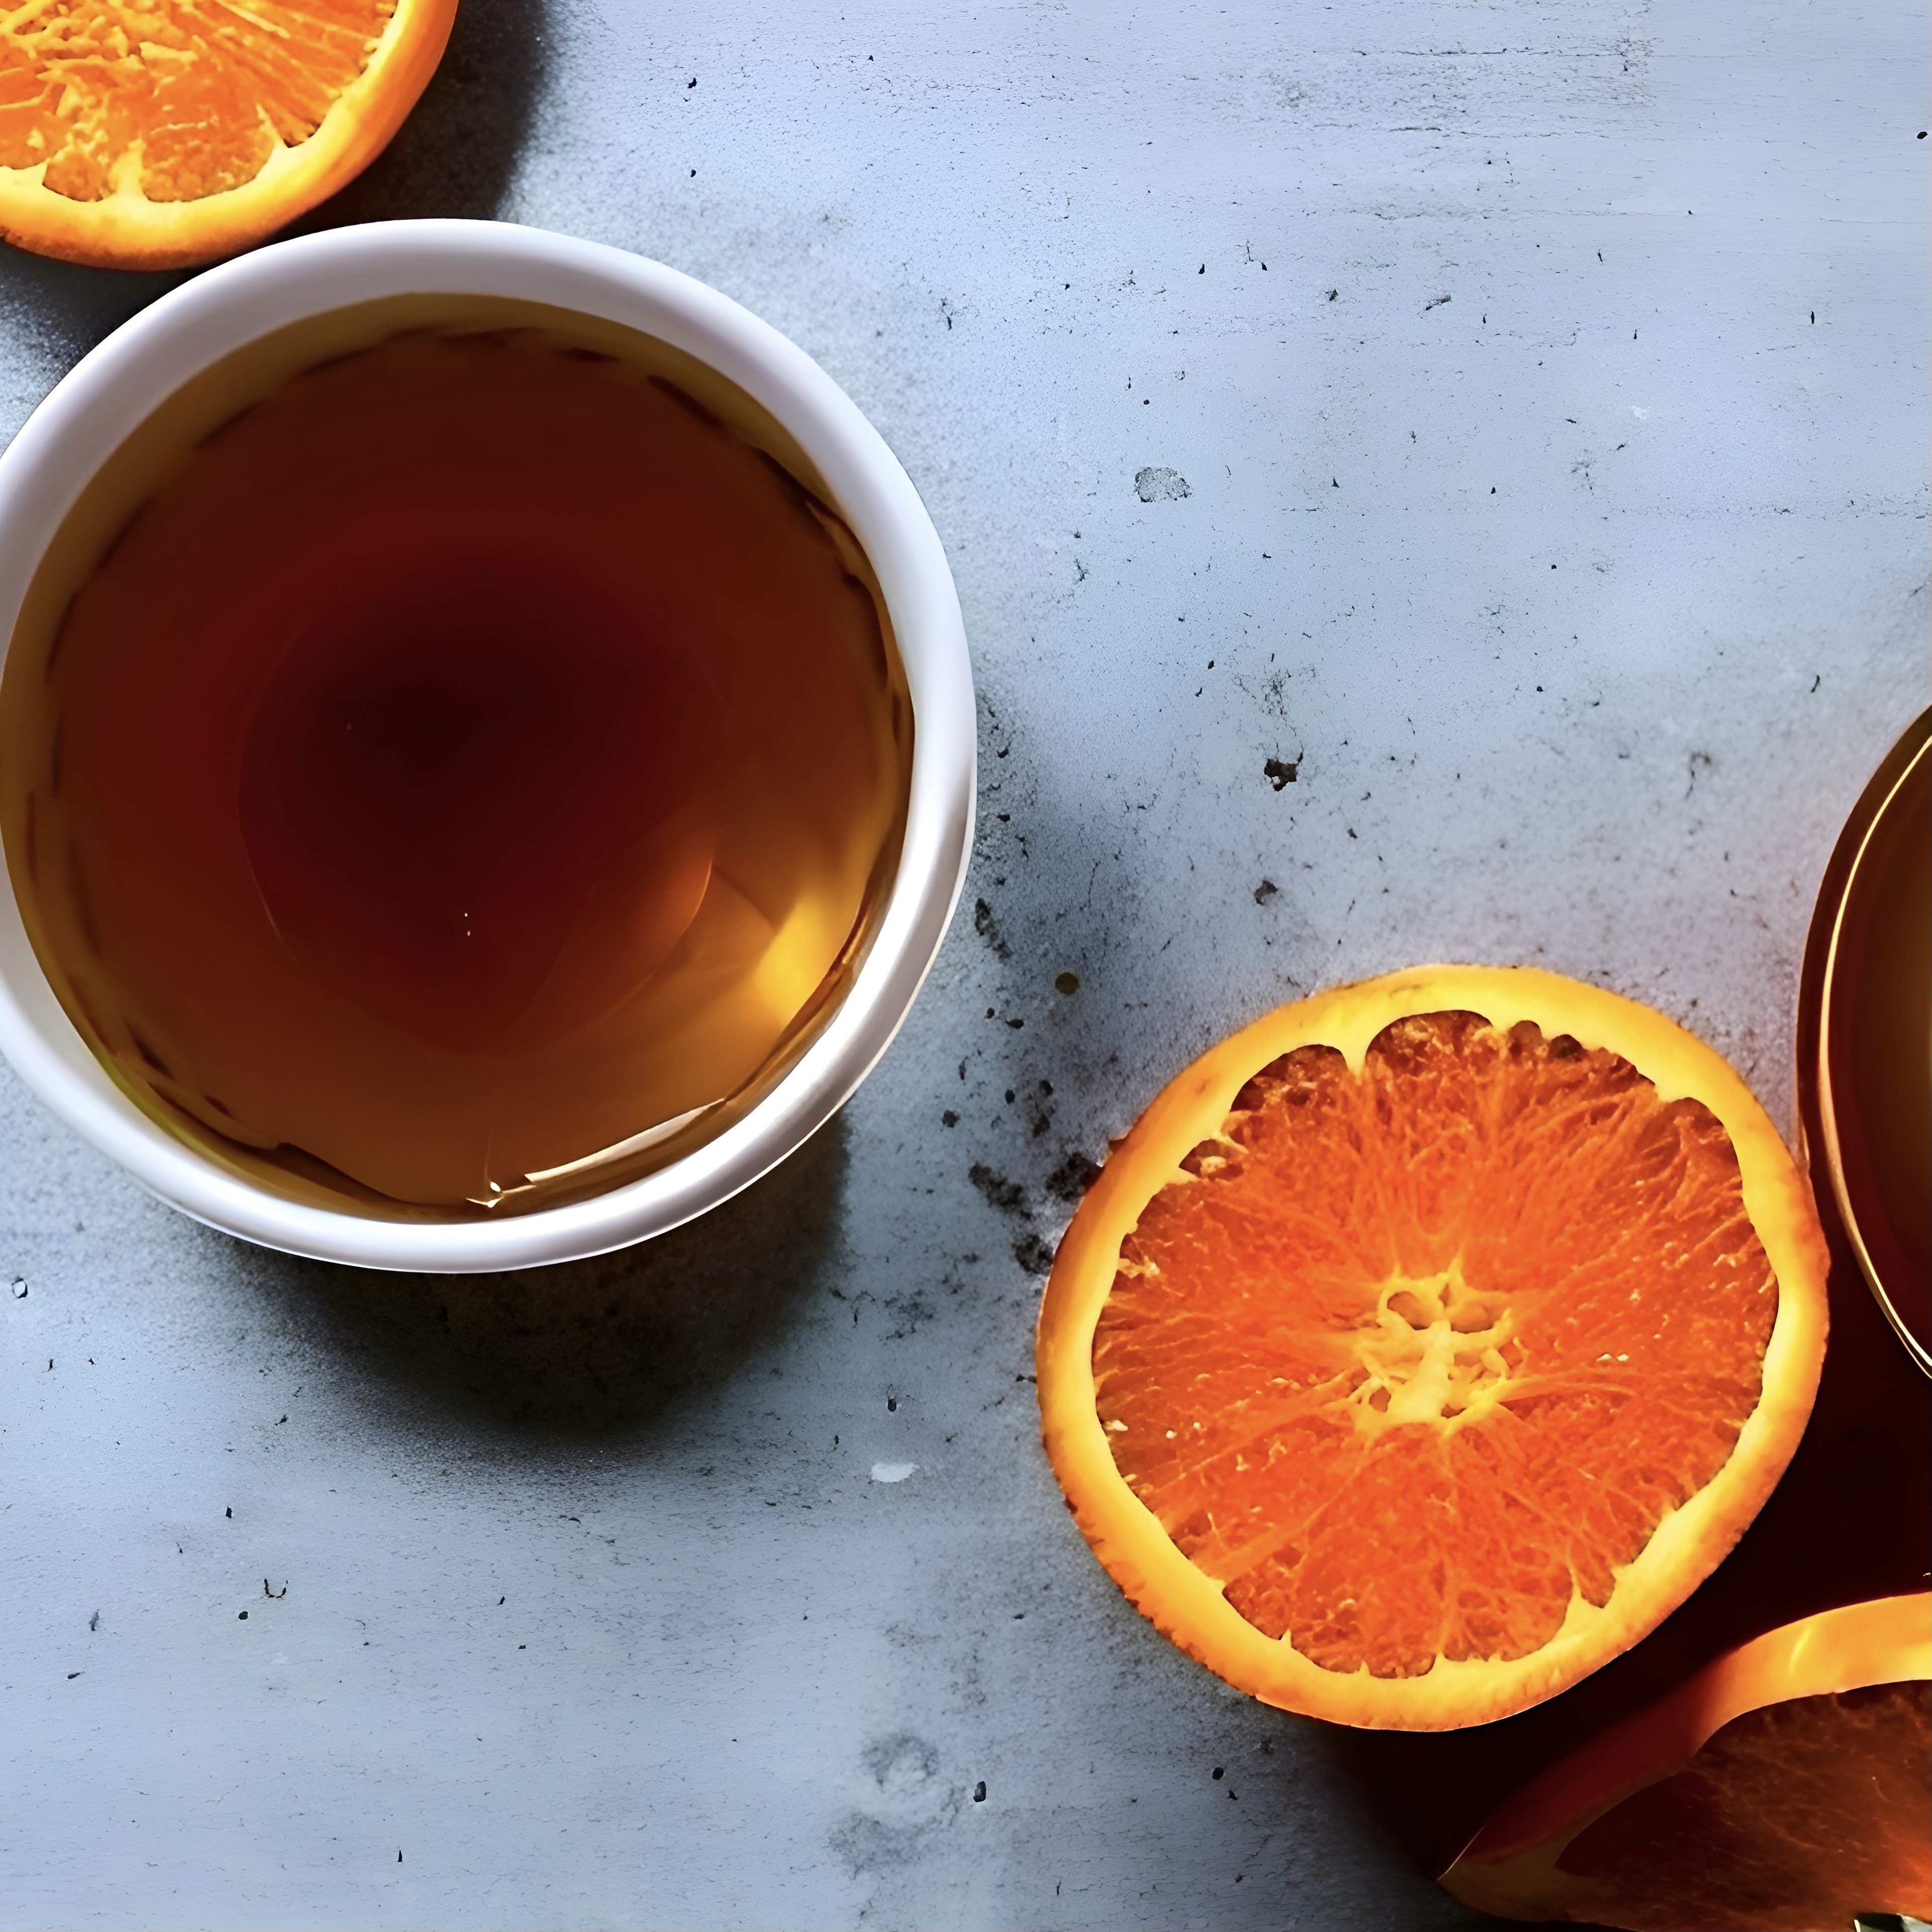 how to use oranges with tea